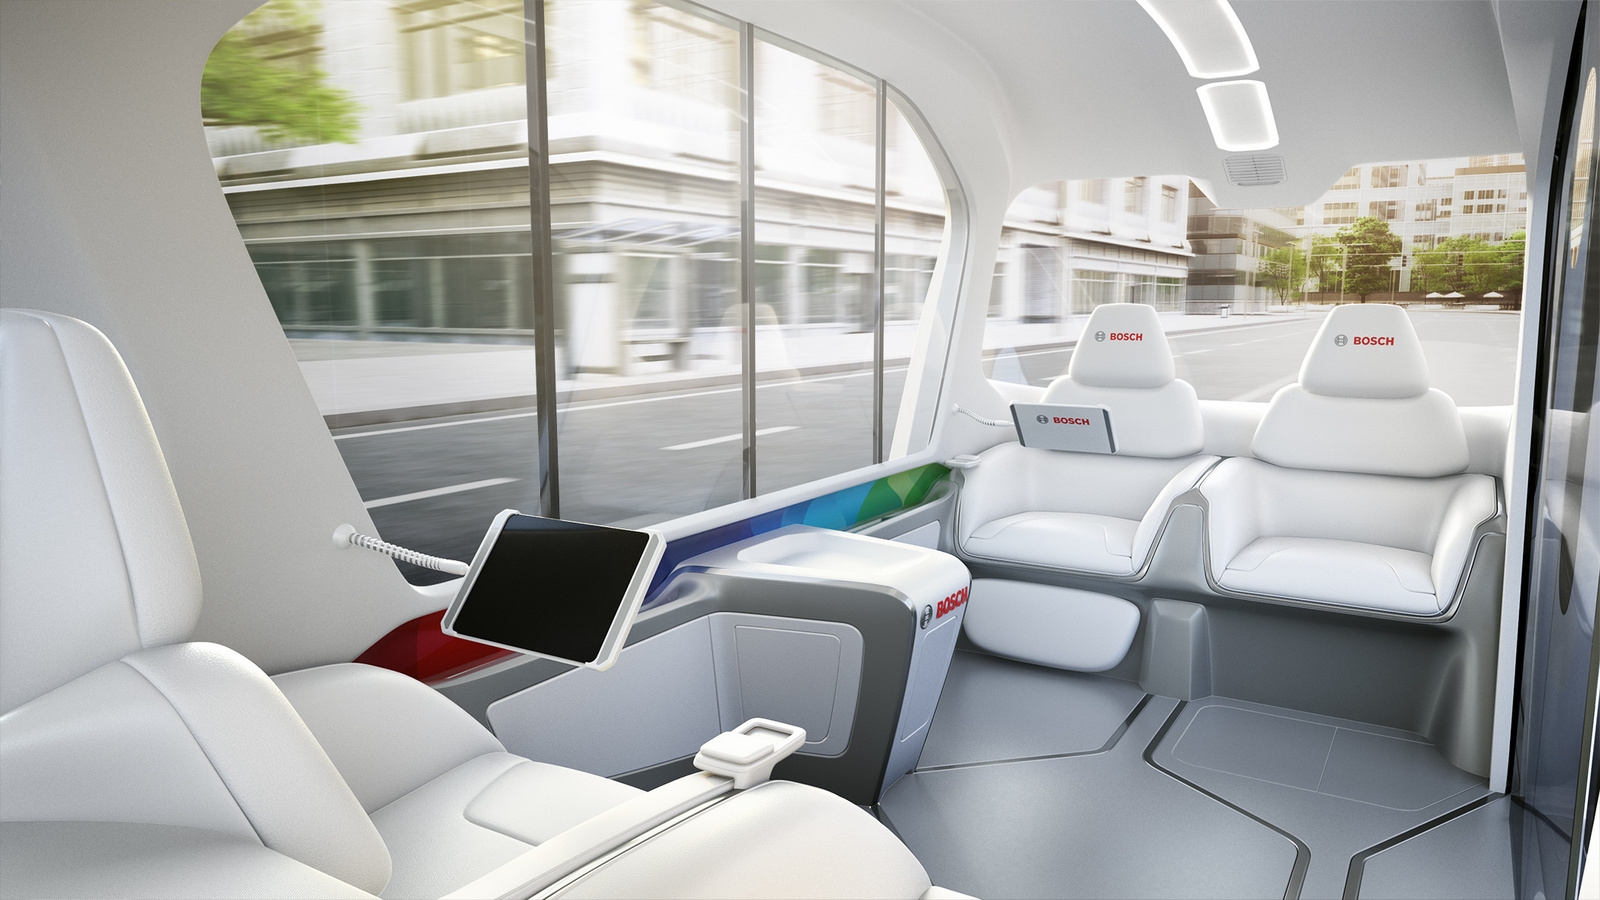 Bosch Shuttle Bus of the future - CES 2019